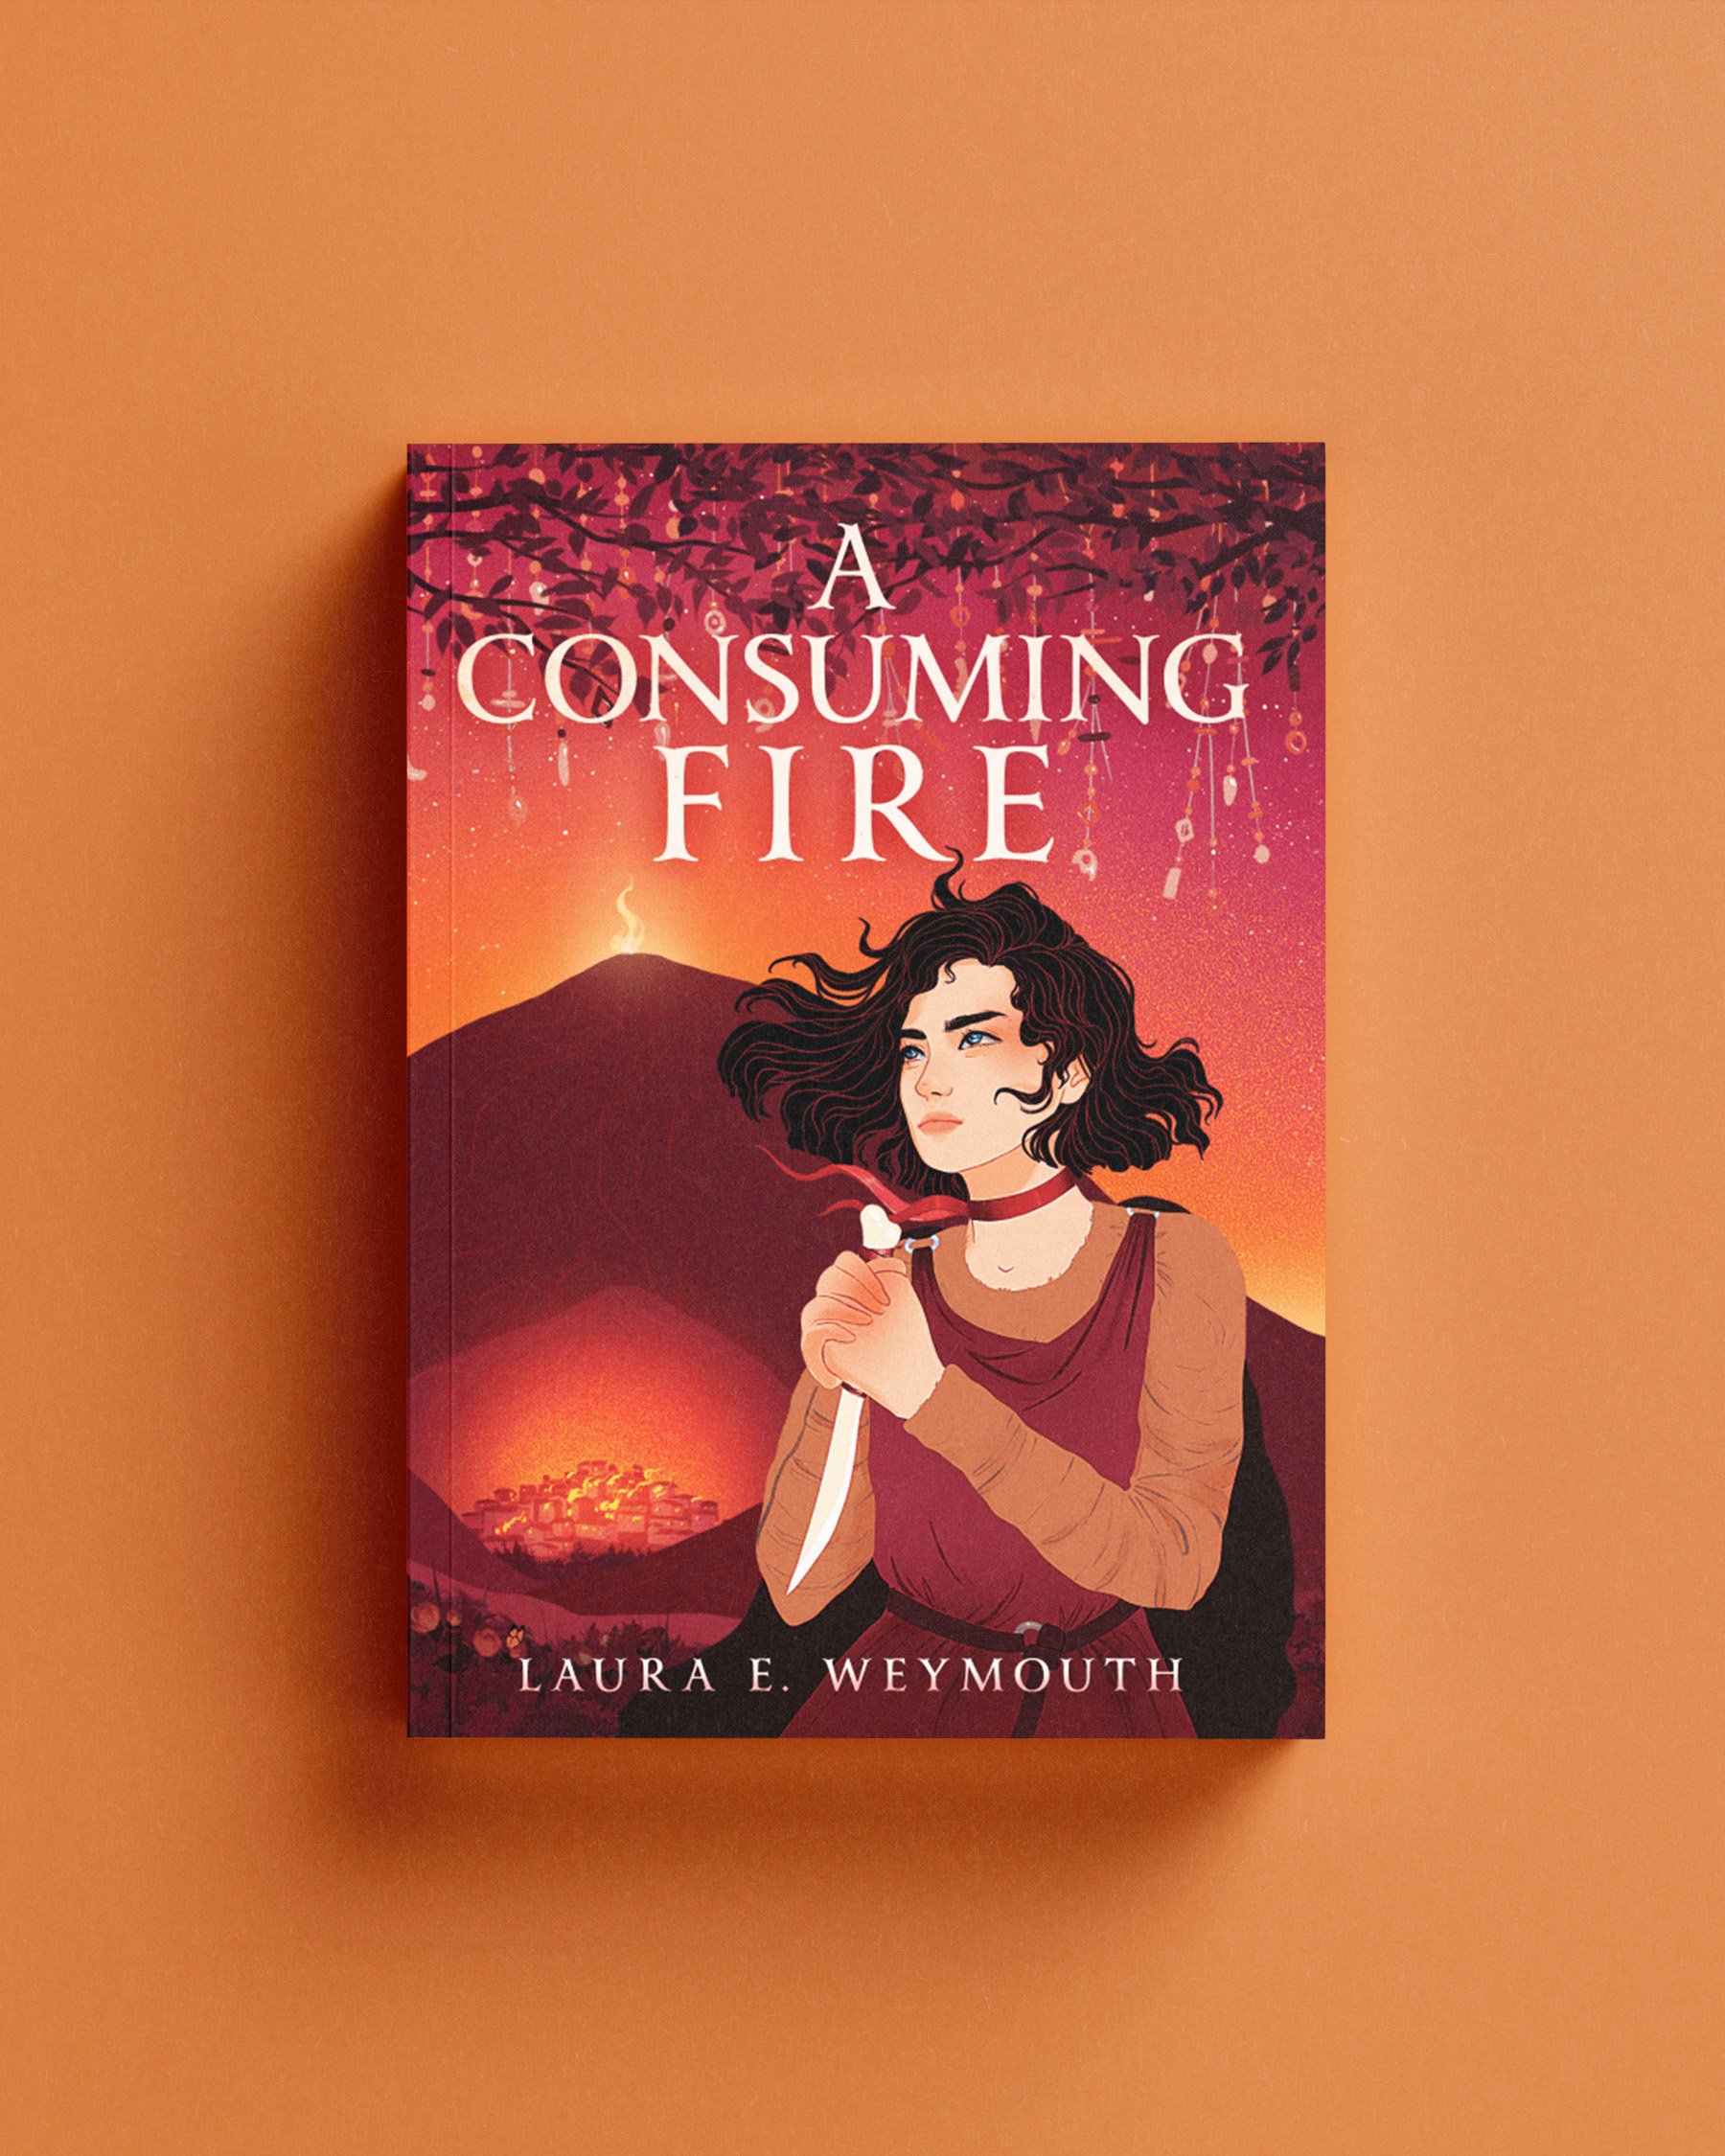 Cover for "A consuming fire" by Laura E. Weymouth 